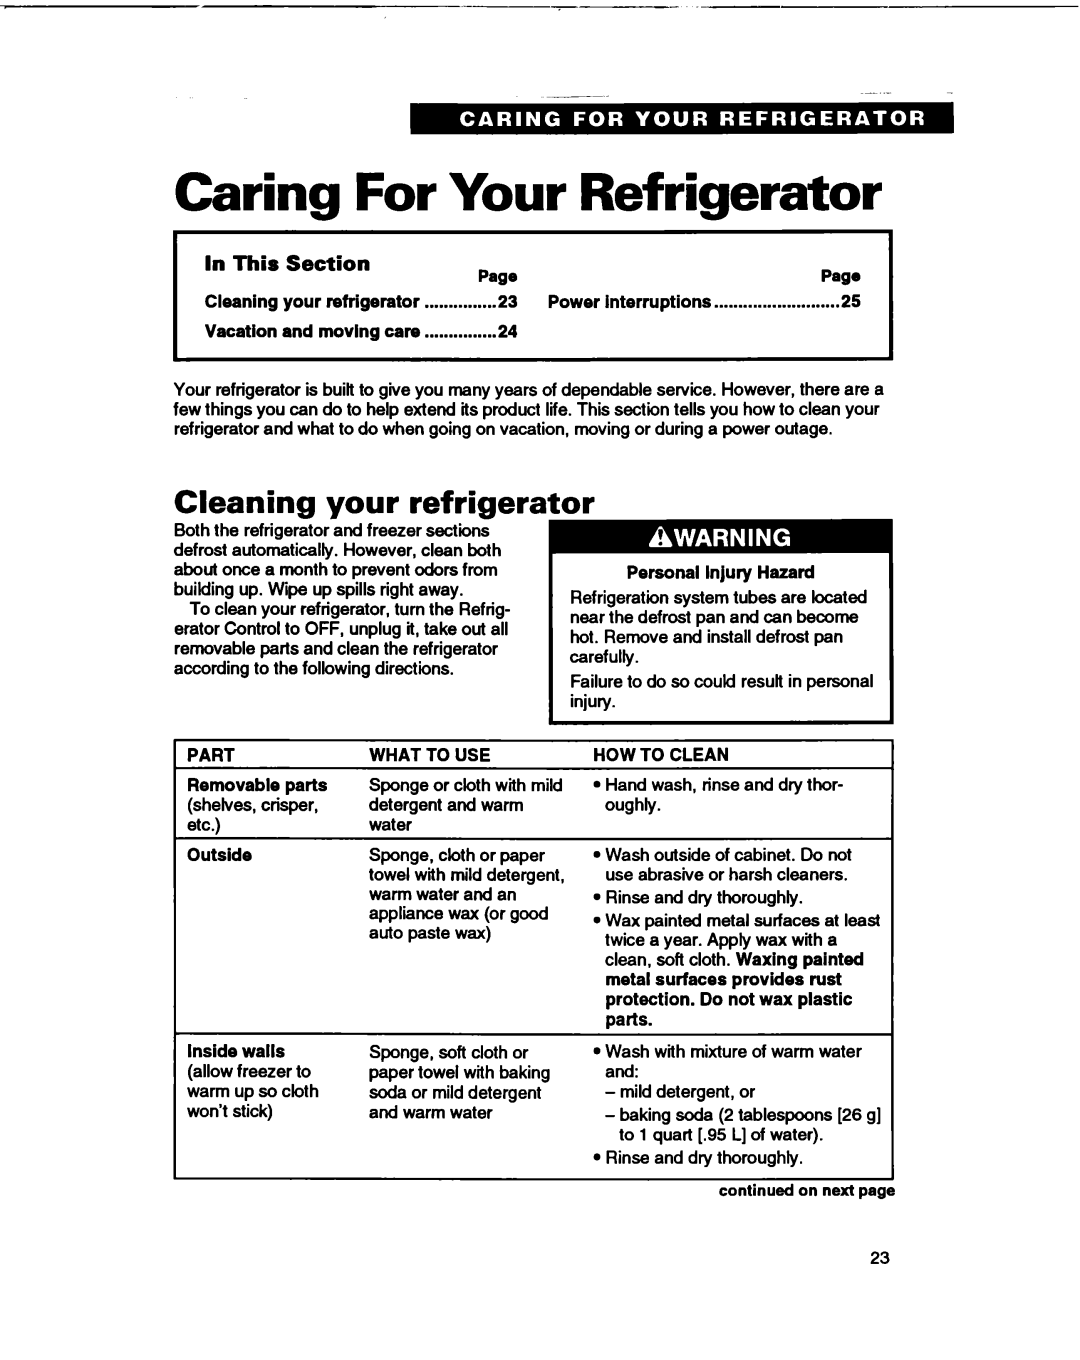 Whirlpool ED22HD, ED27DQ, ED25DQ, ED22DQ warranty Caring For Your Refrigerator, Cleaning your refrigerator, In This, Section 